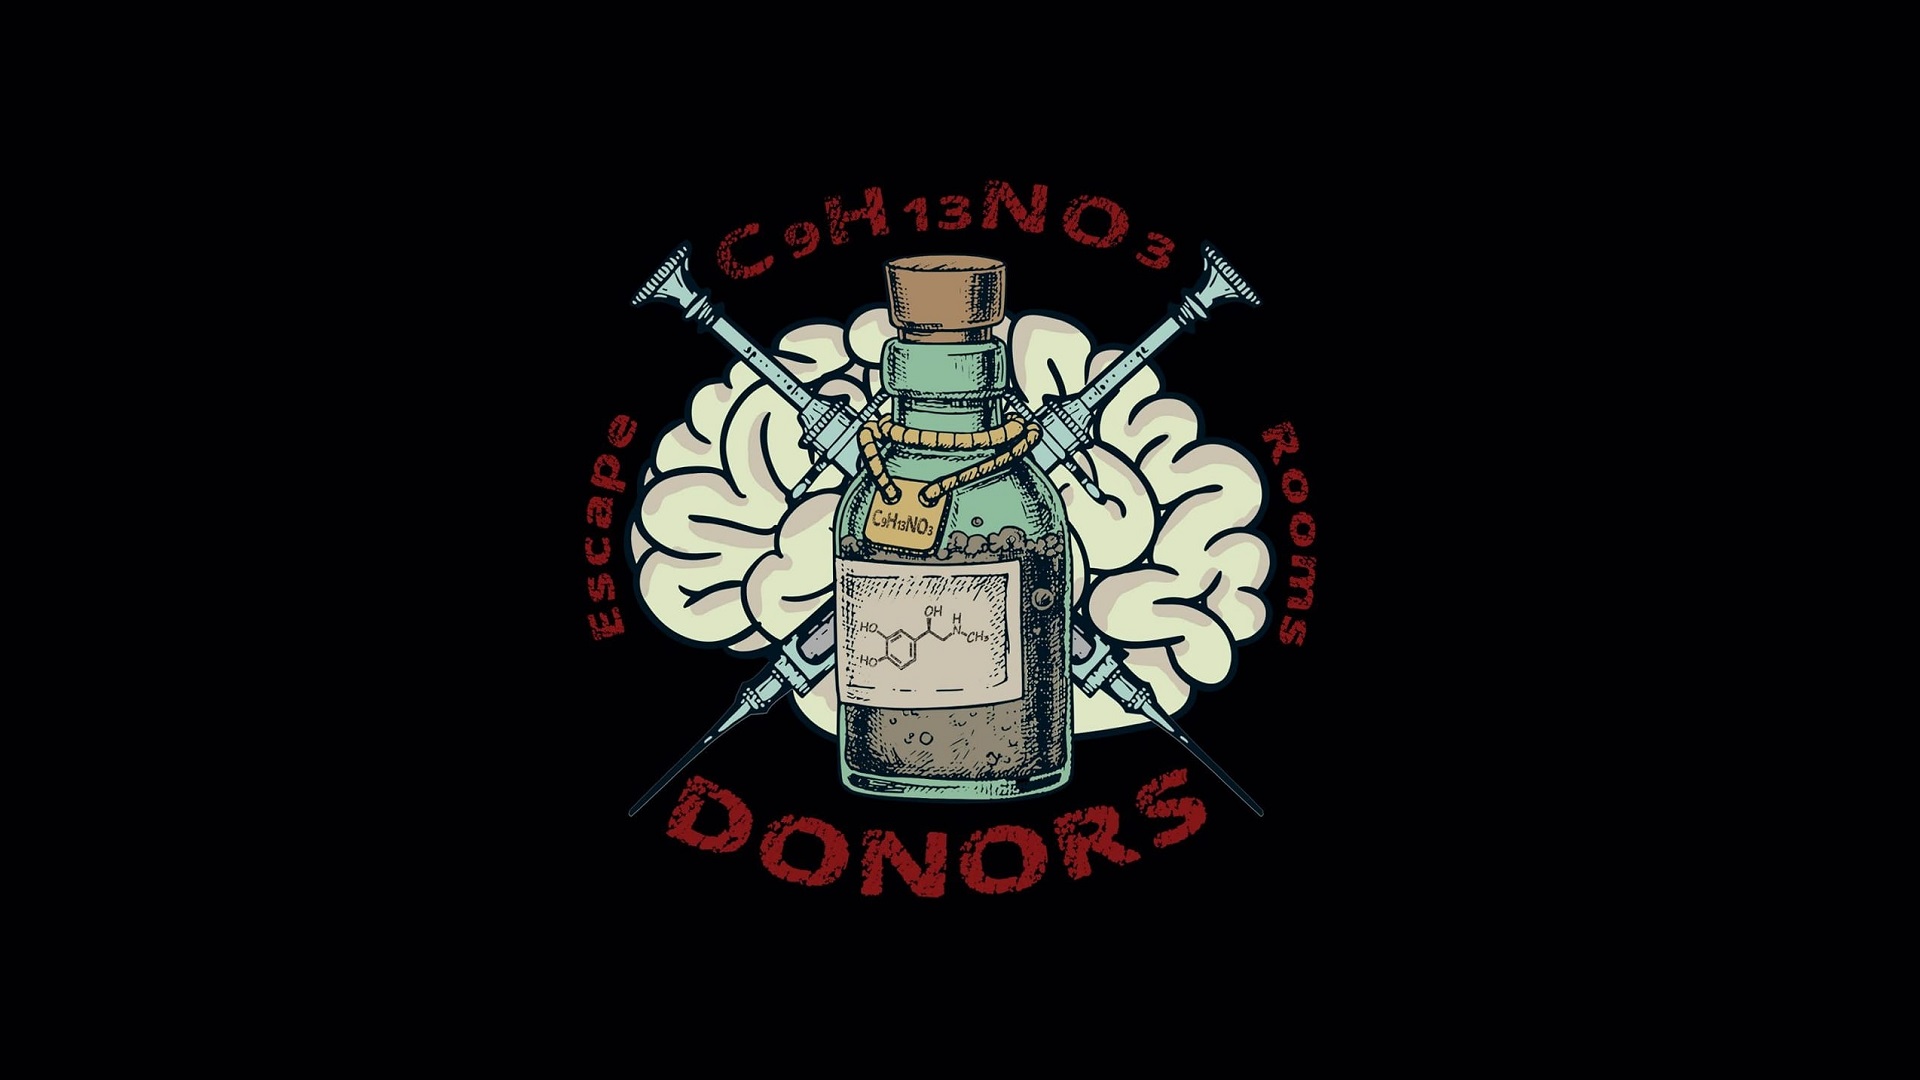 C9 H13 NO3 Donors